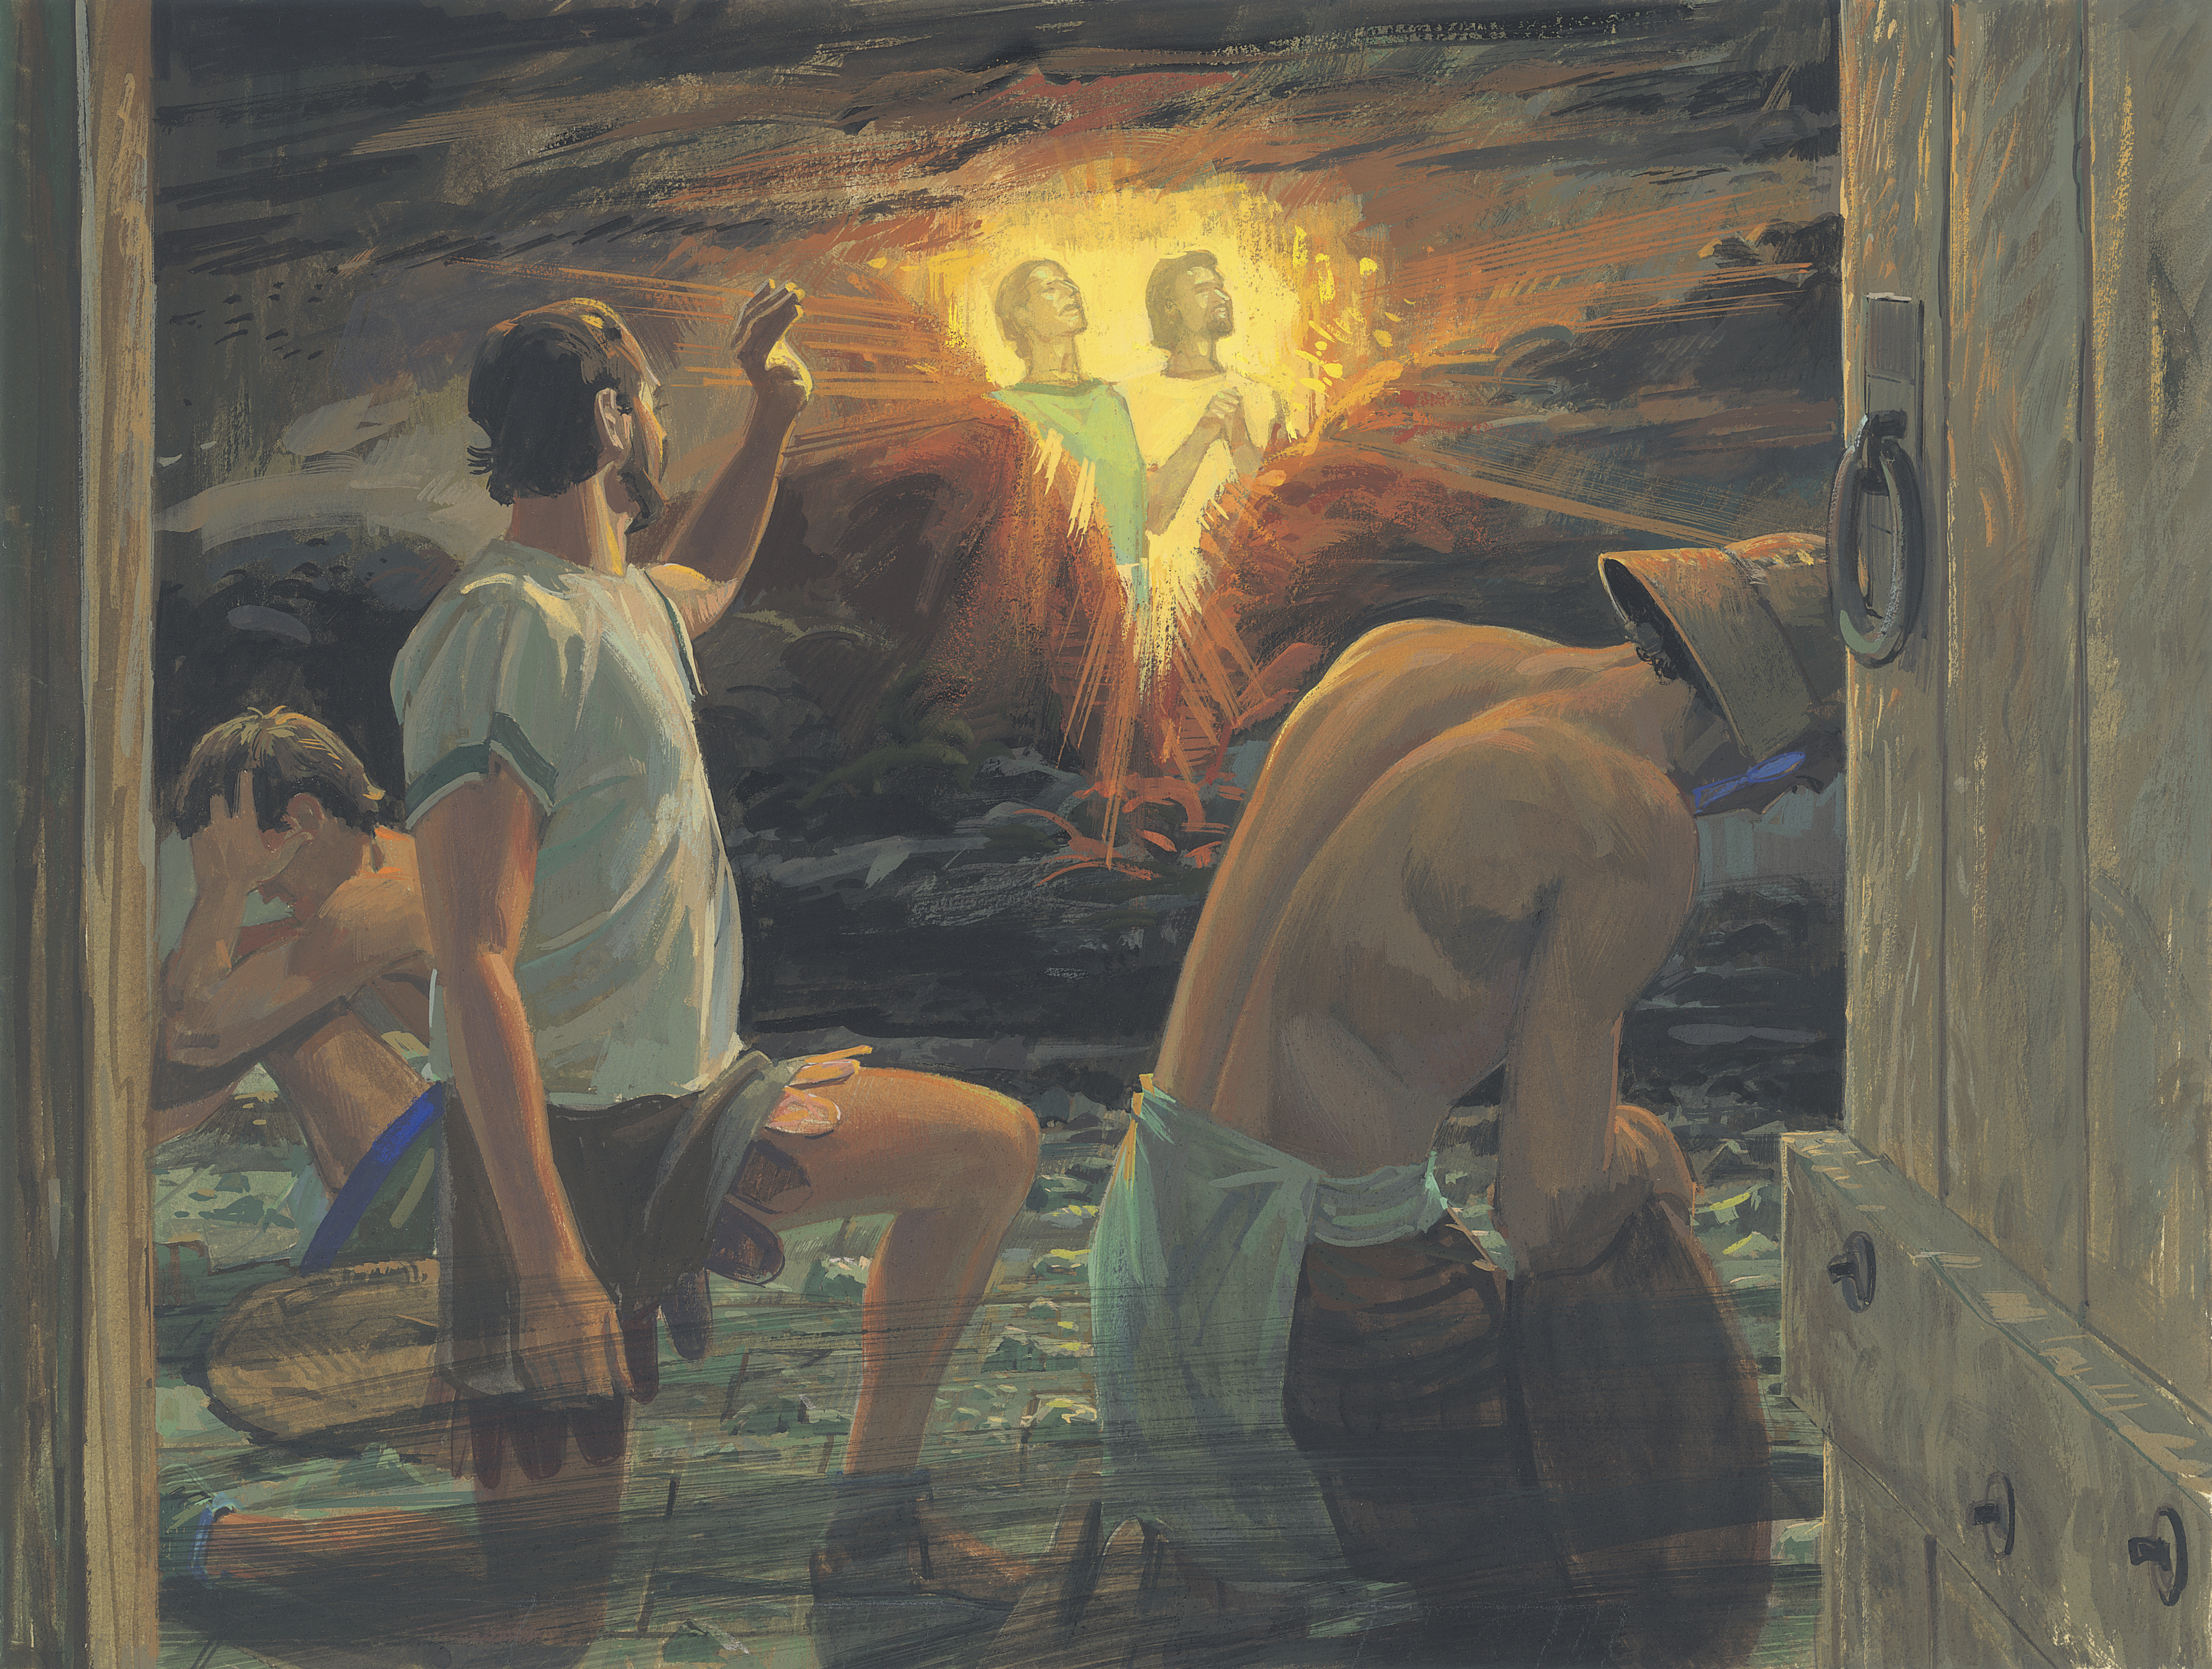 A painting by Jerry Thompson depicting Nephi and Lehi in prison.